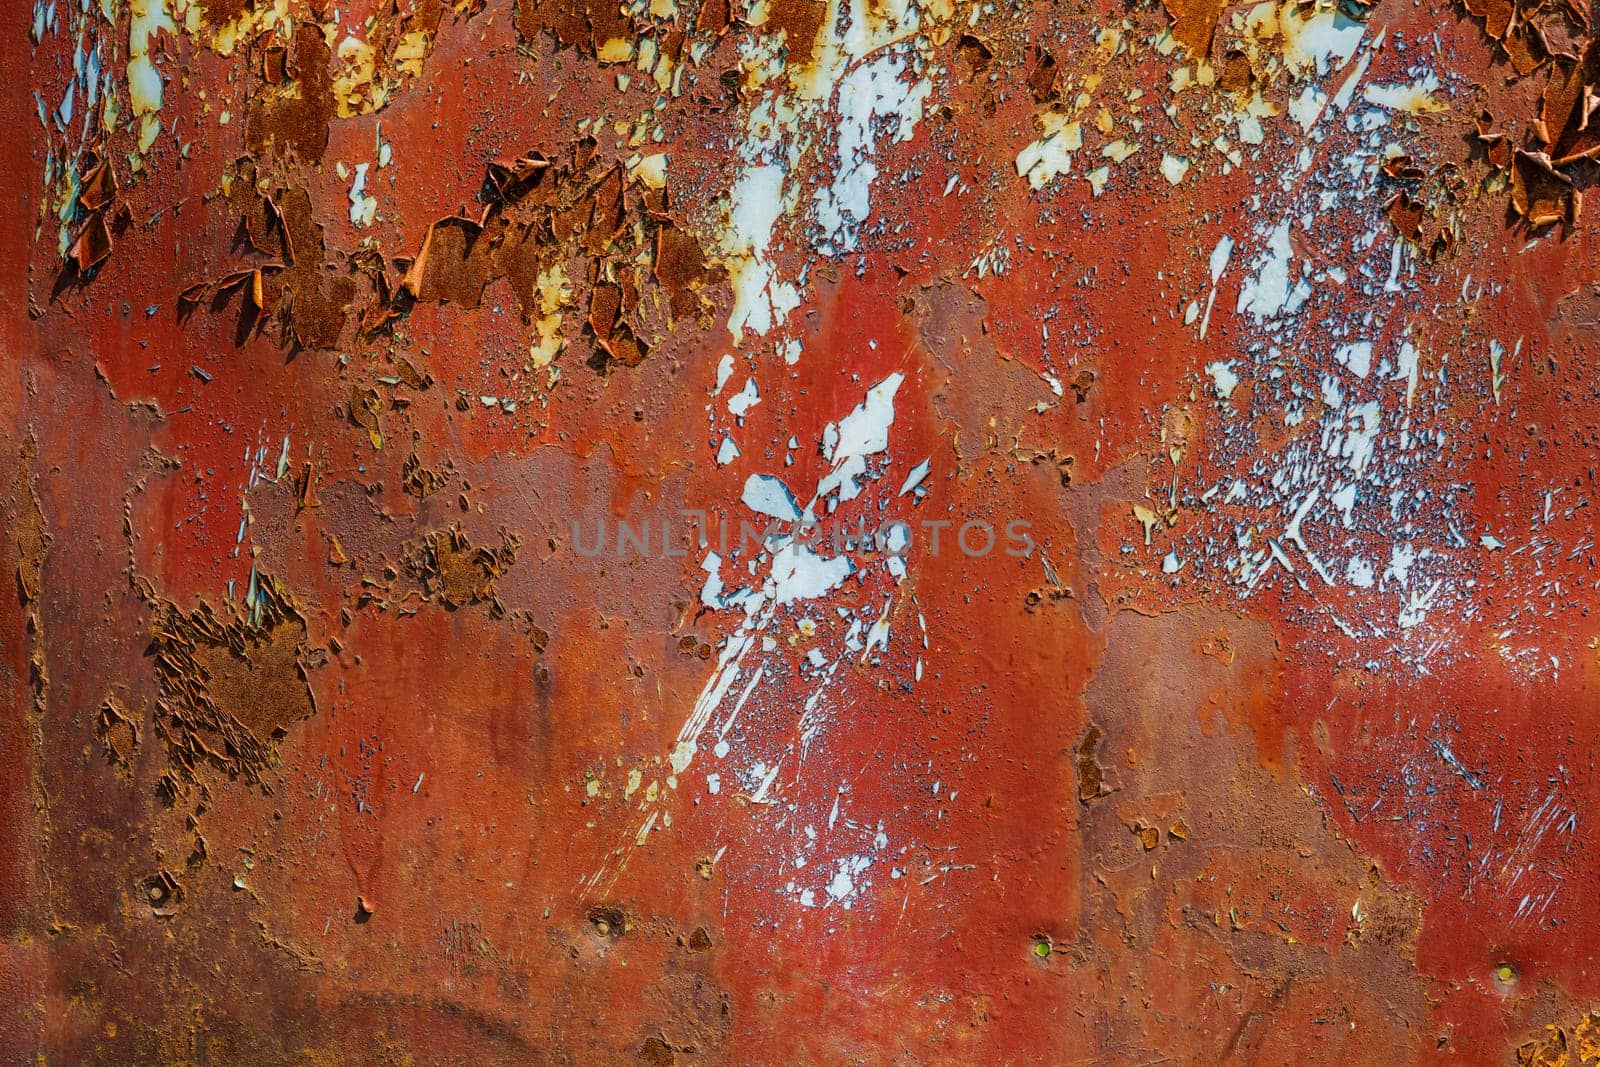 Closeup of rusty metal with peeling brown paint under direct sun light, full-frame background and texture.